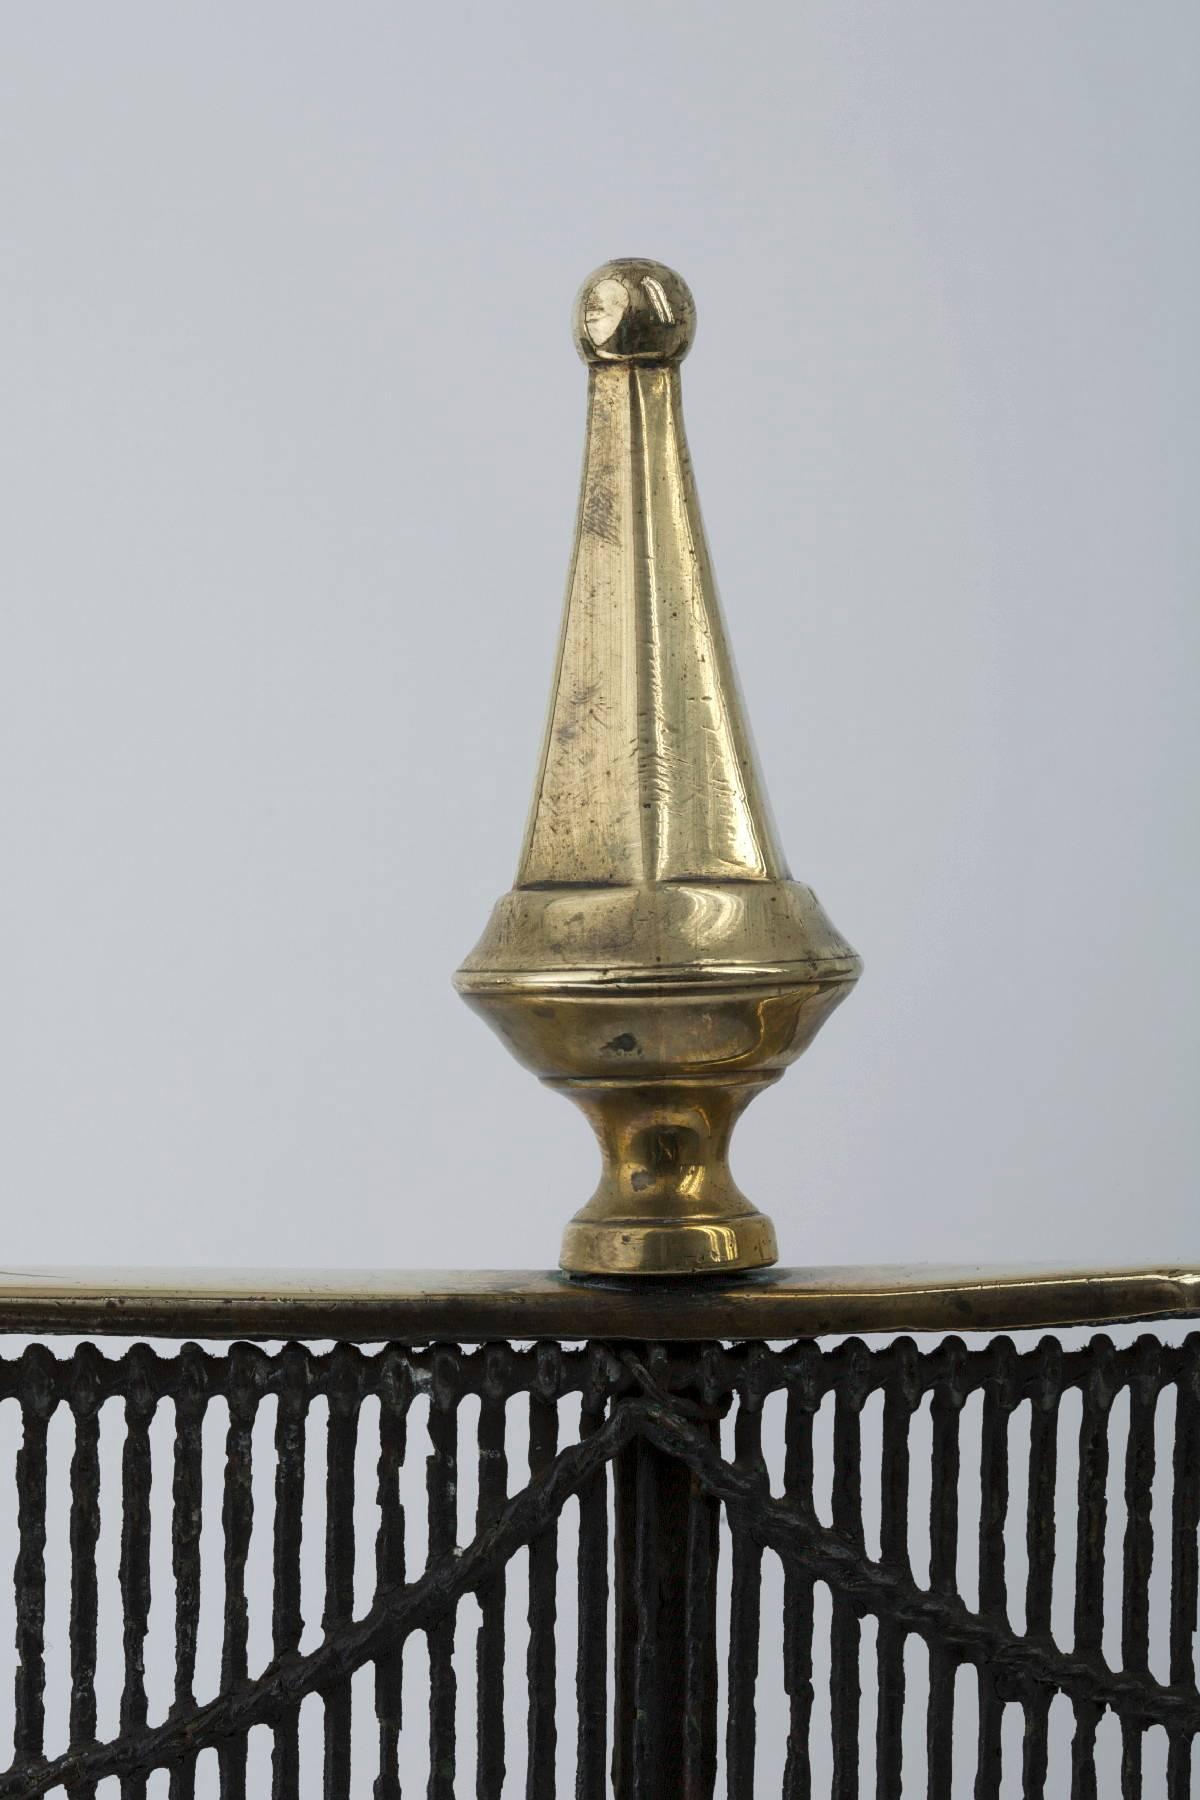 English, wire with brass rail period fire fender with three steeple top finials as both feet and rail decoration, 30.5″ L, 17.5″ H, 12.0″ D, circa 1780.